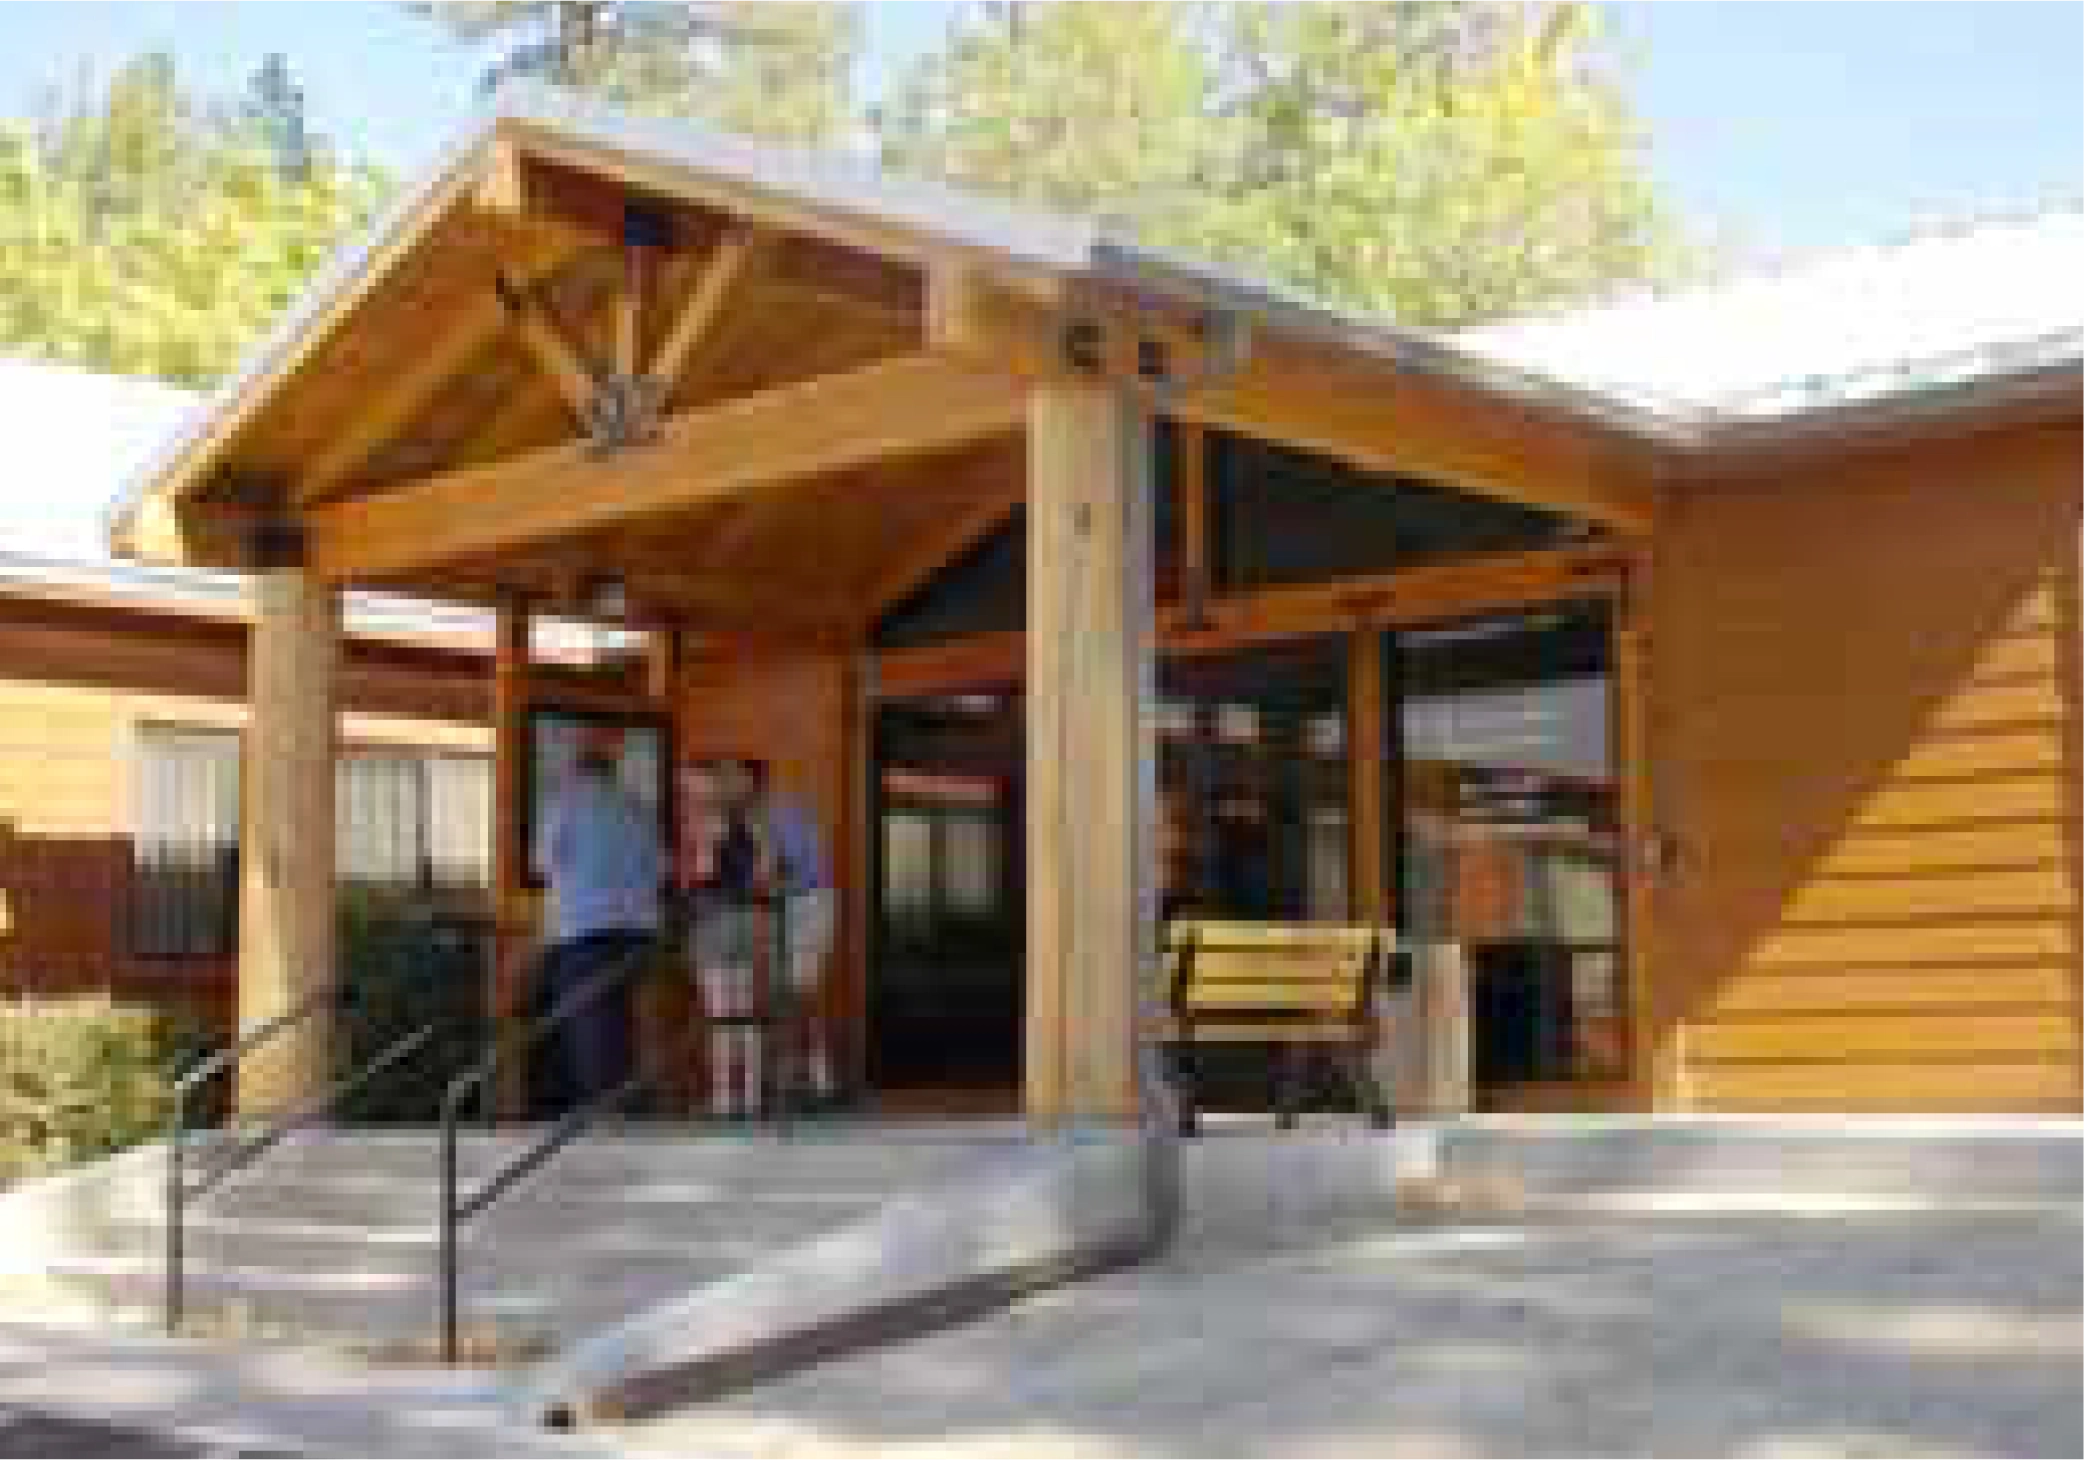 A picture of the front entrance to the San Jacinto Ranger Station